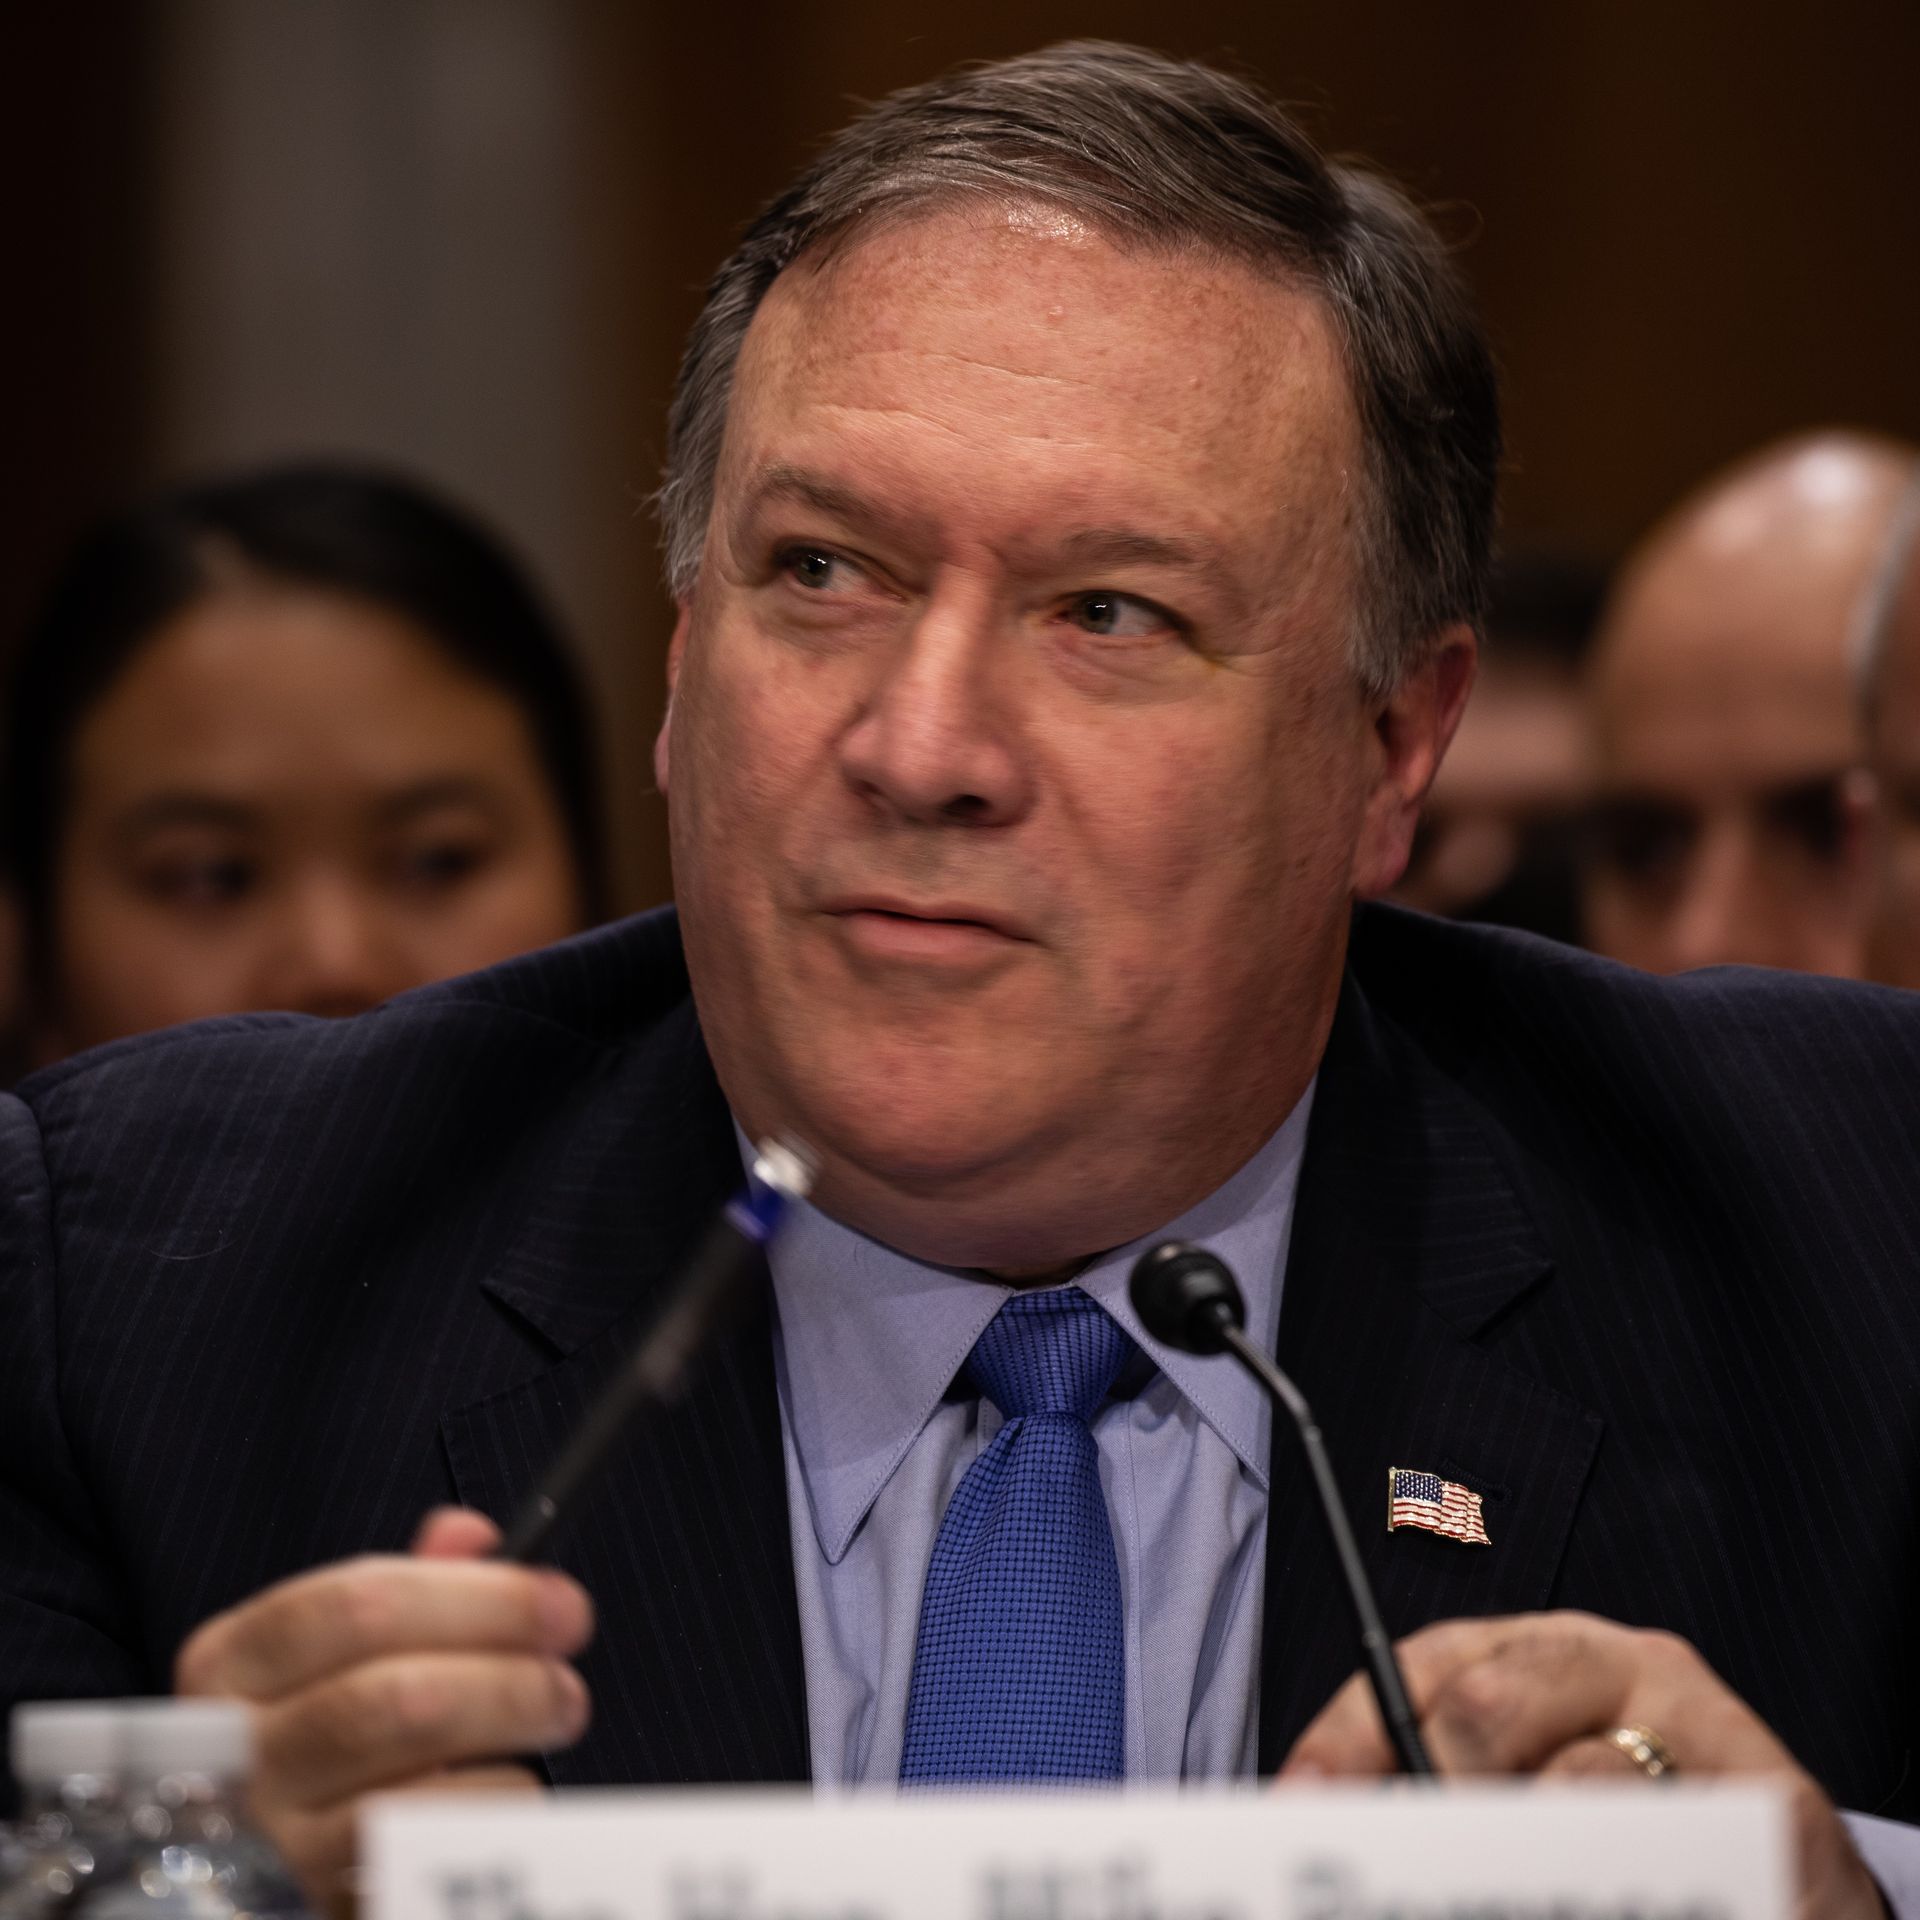 Mike Pompeo seated during his Senate testimony